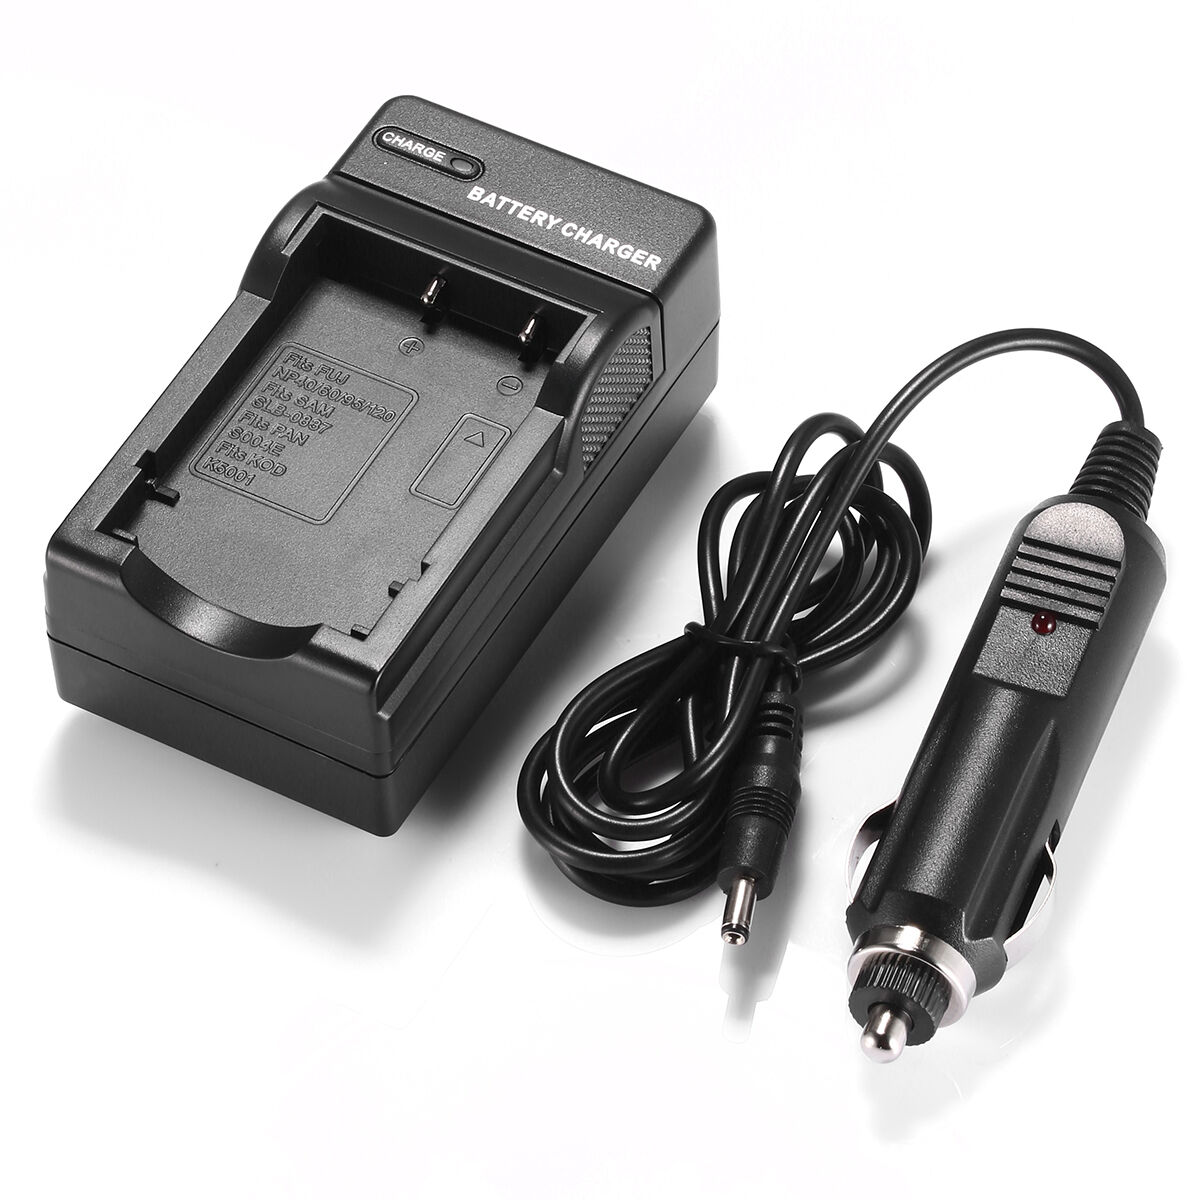 CASIO Exilim Zoom EX-Z19BK battery charger